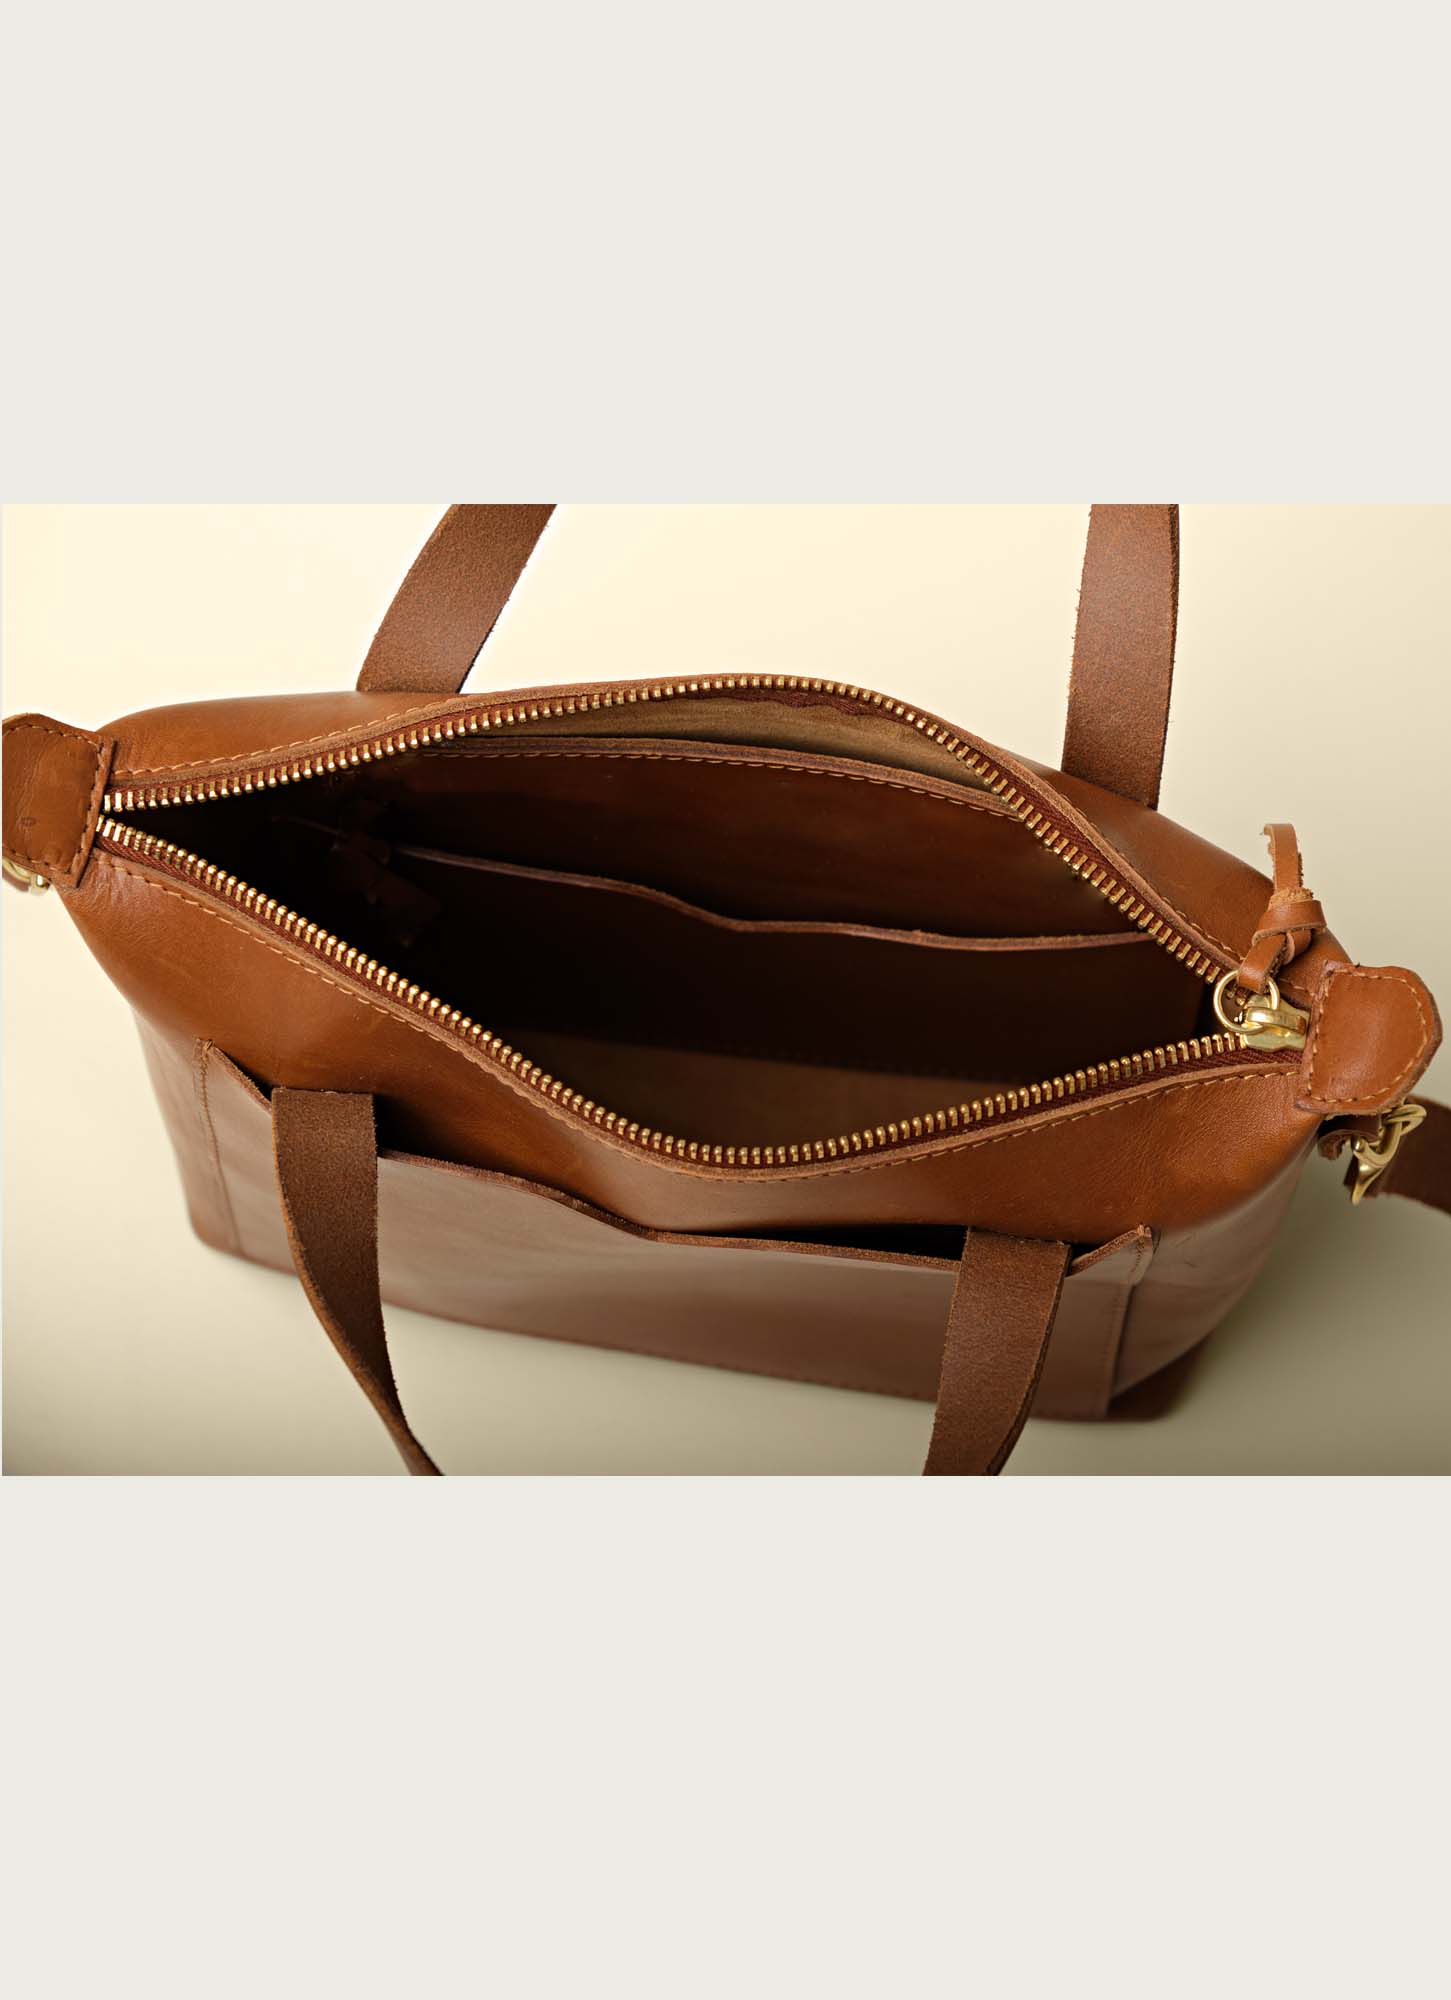 Crossbody Bags for Women Small Handbags PU Leather Shoulder Bag Ladies Purse  Evening Bag Quilted Satchels with Chain Strap,brown，G168664 - Walmart.com